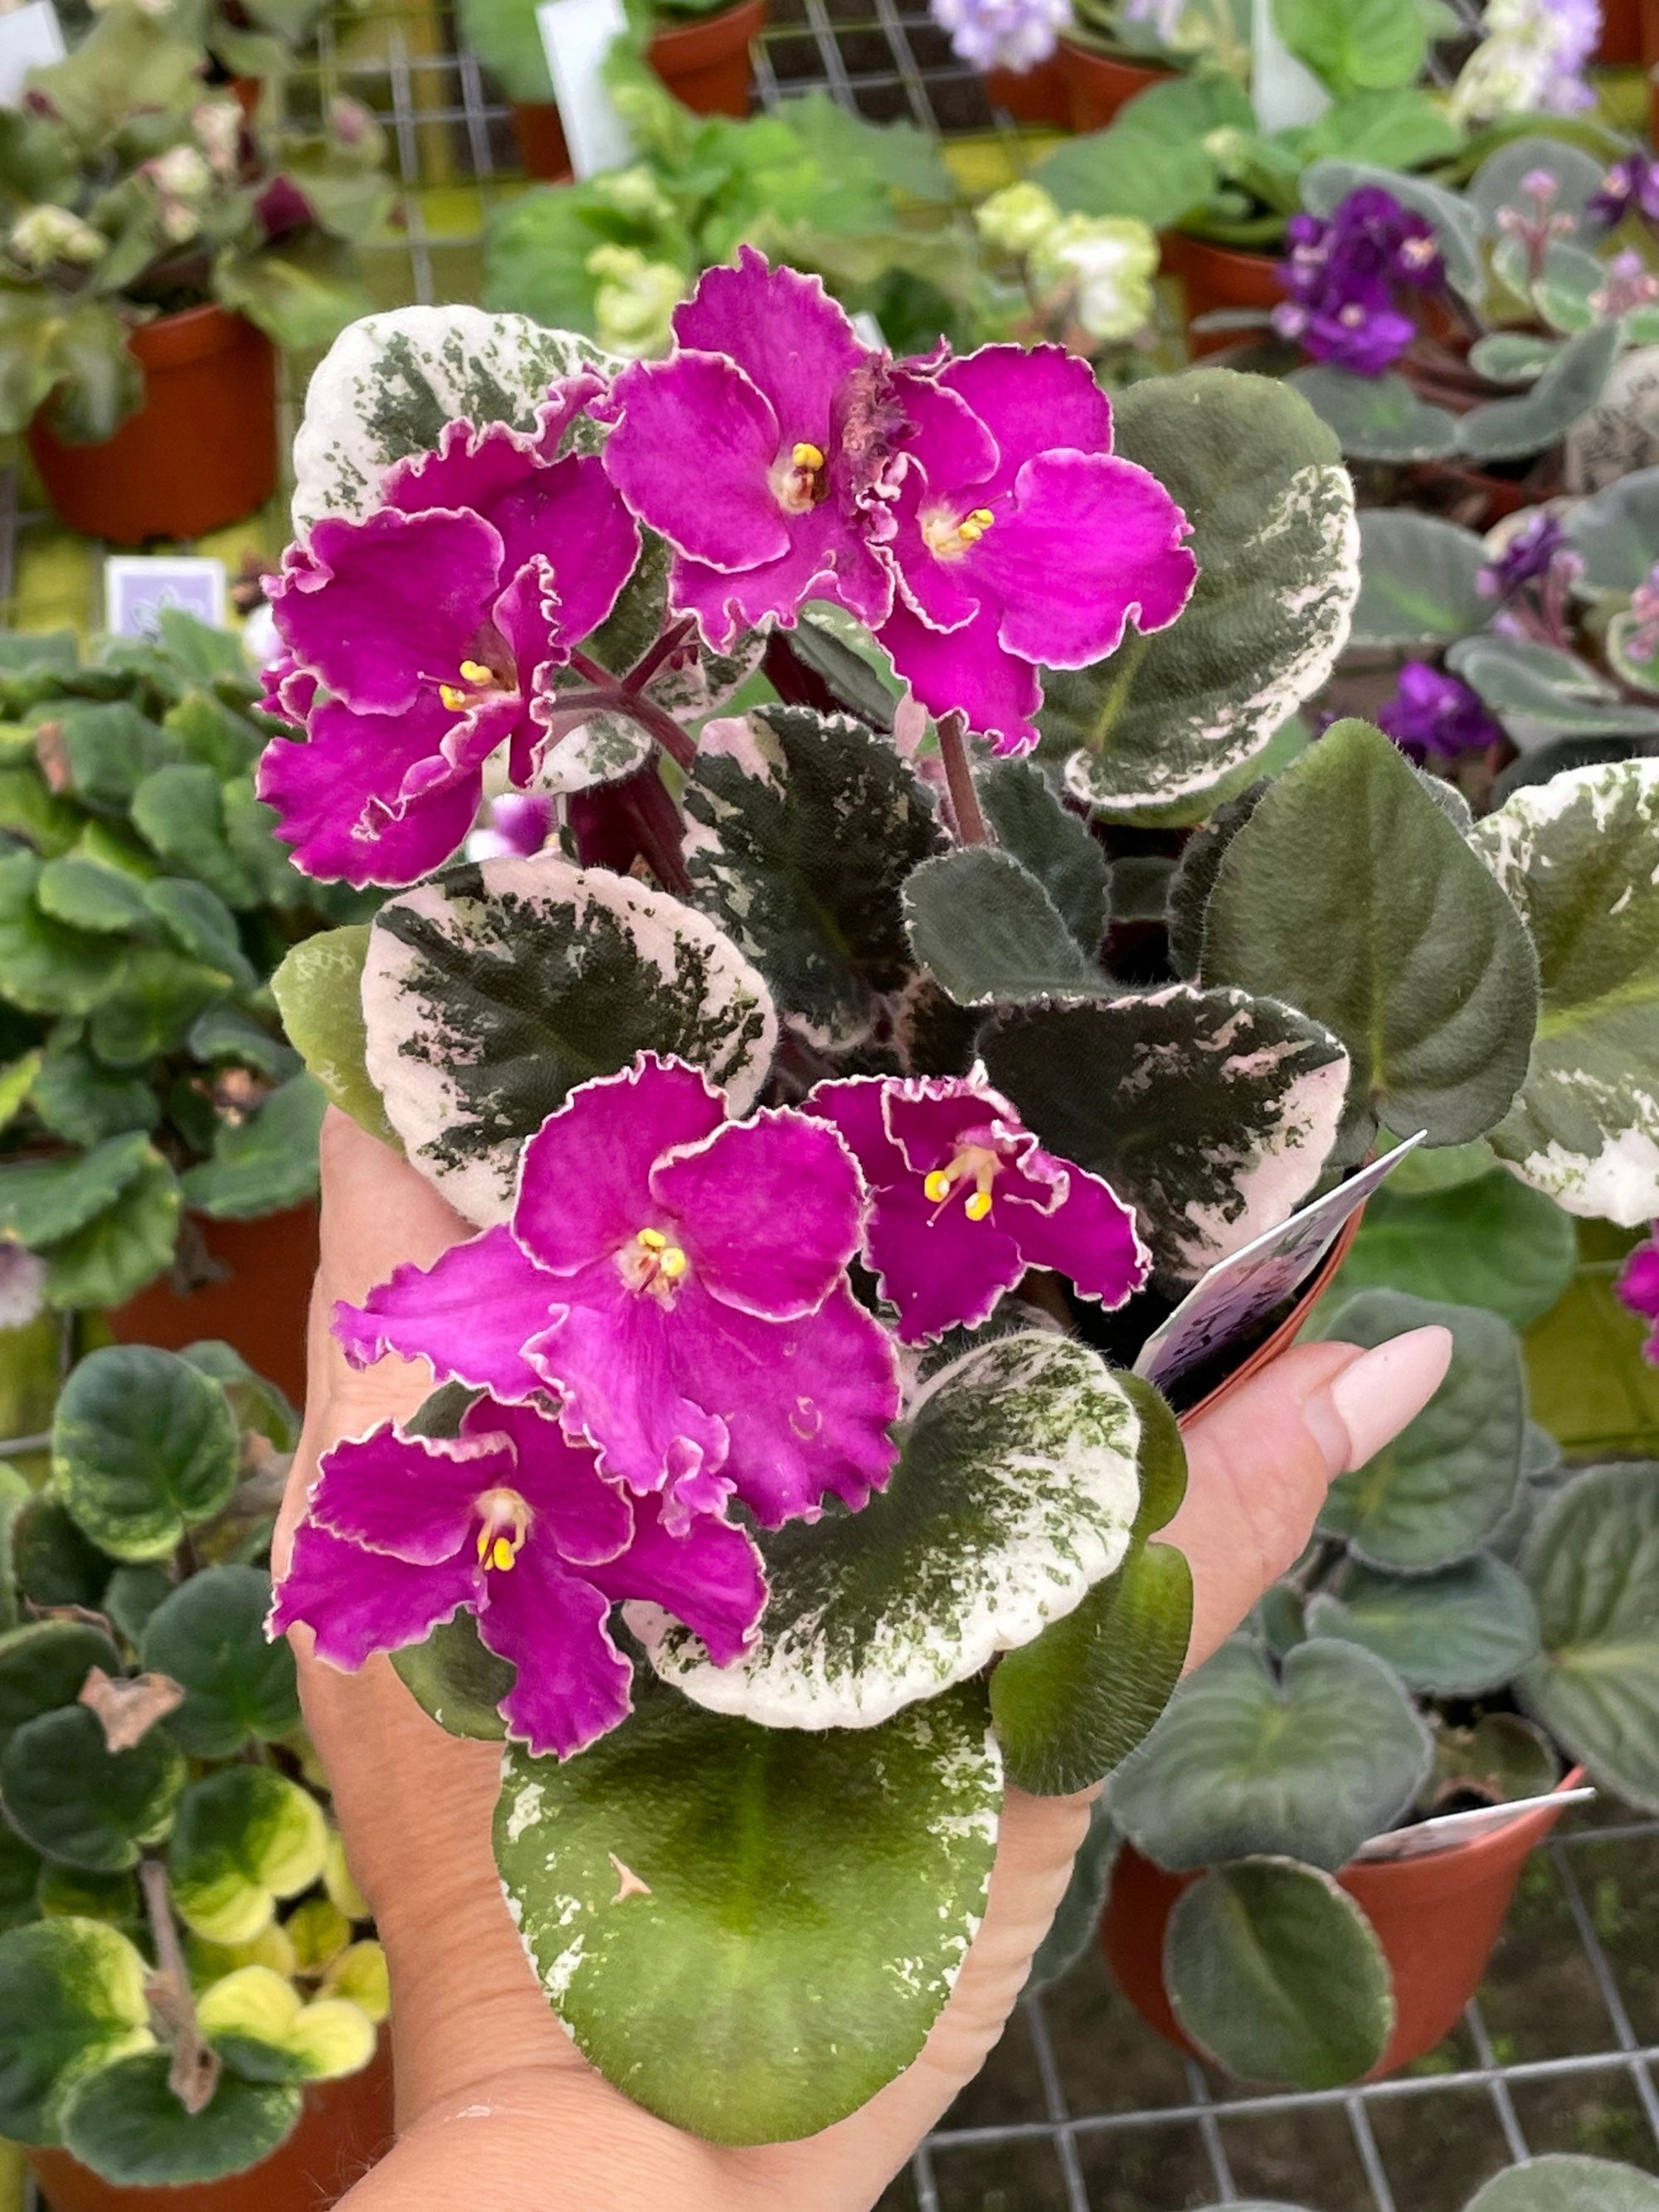 Live house plant variegated bloom Harmonys African Violet Buckeye Lets Roll garden 4 flower Potted gift